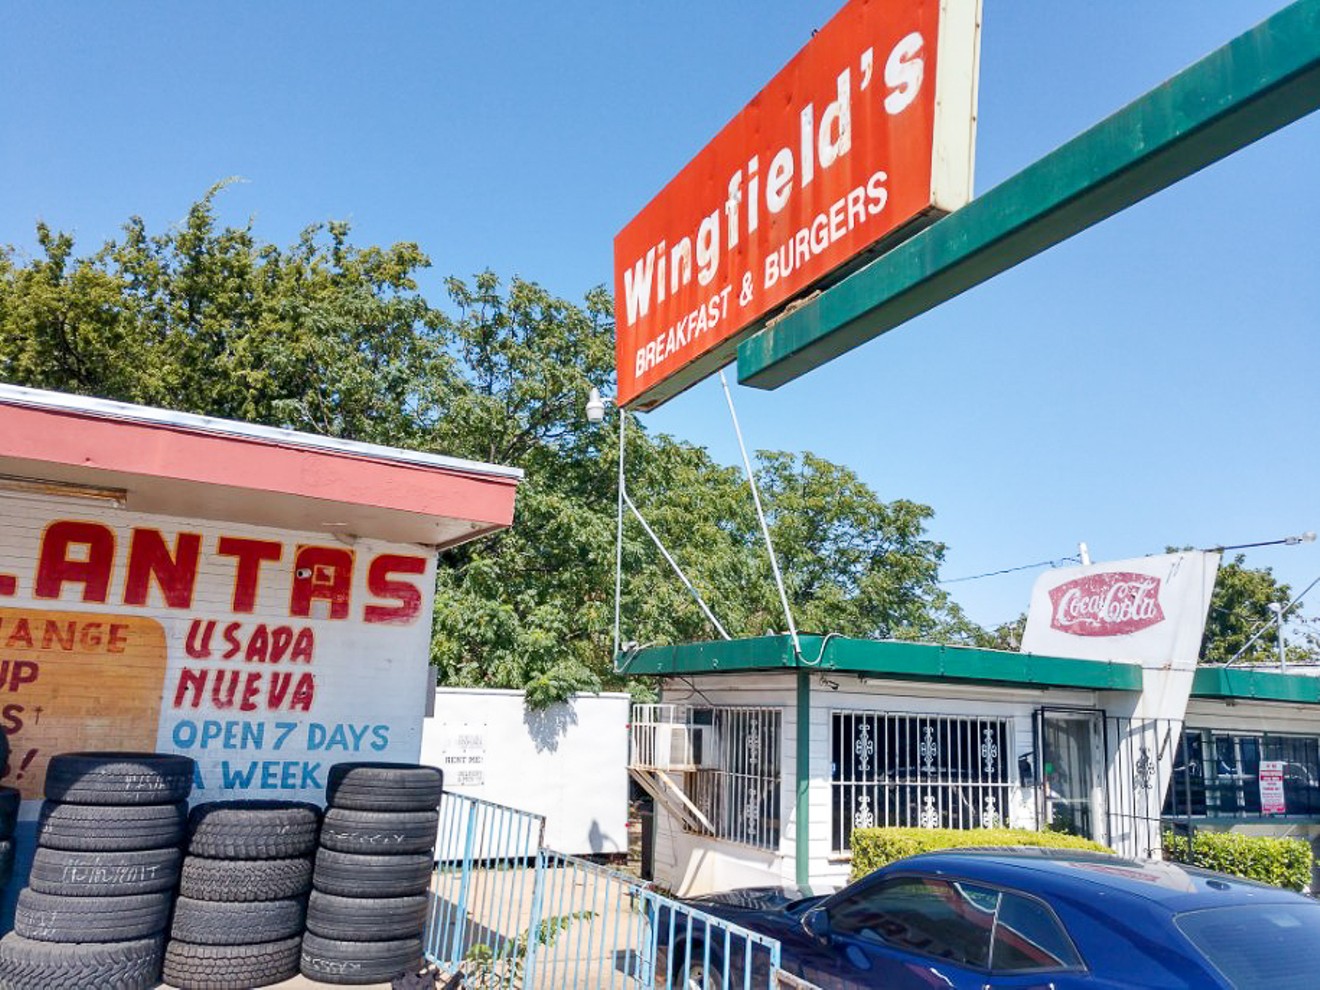 Don't let this modest storefront on South Beckley Avenue fool you. Inside are some of the best burgers in town.